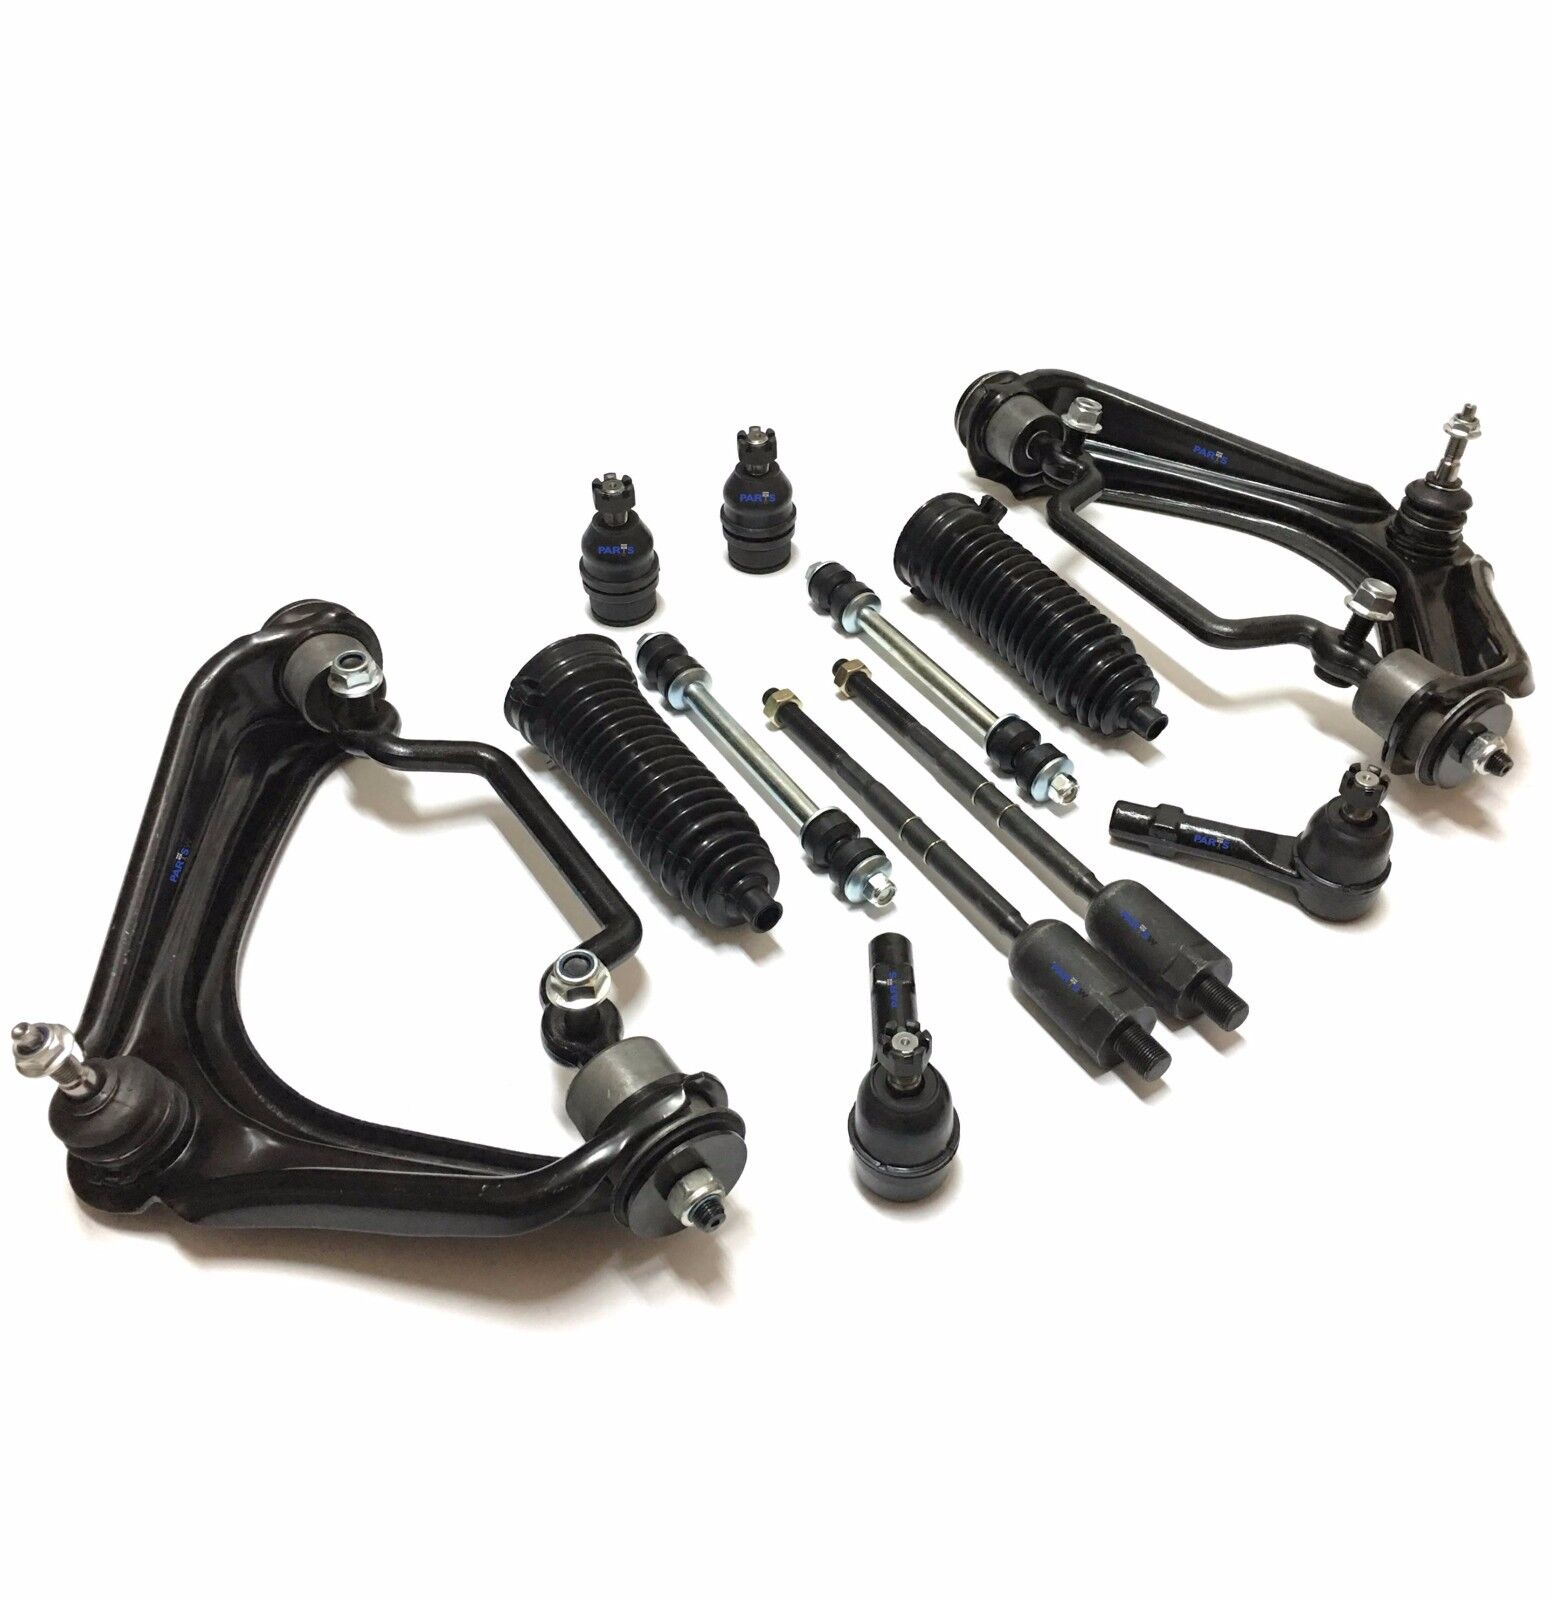 12 Pc Complete Suspension Kit For Ford Explorer and Mercury Mountaineer 4.0L V6